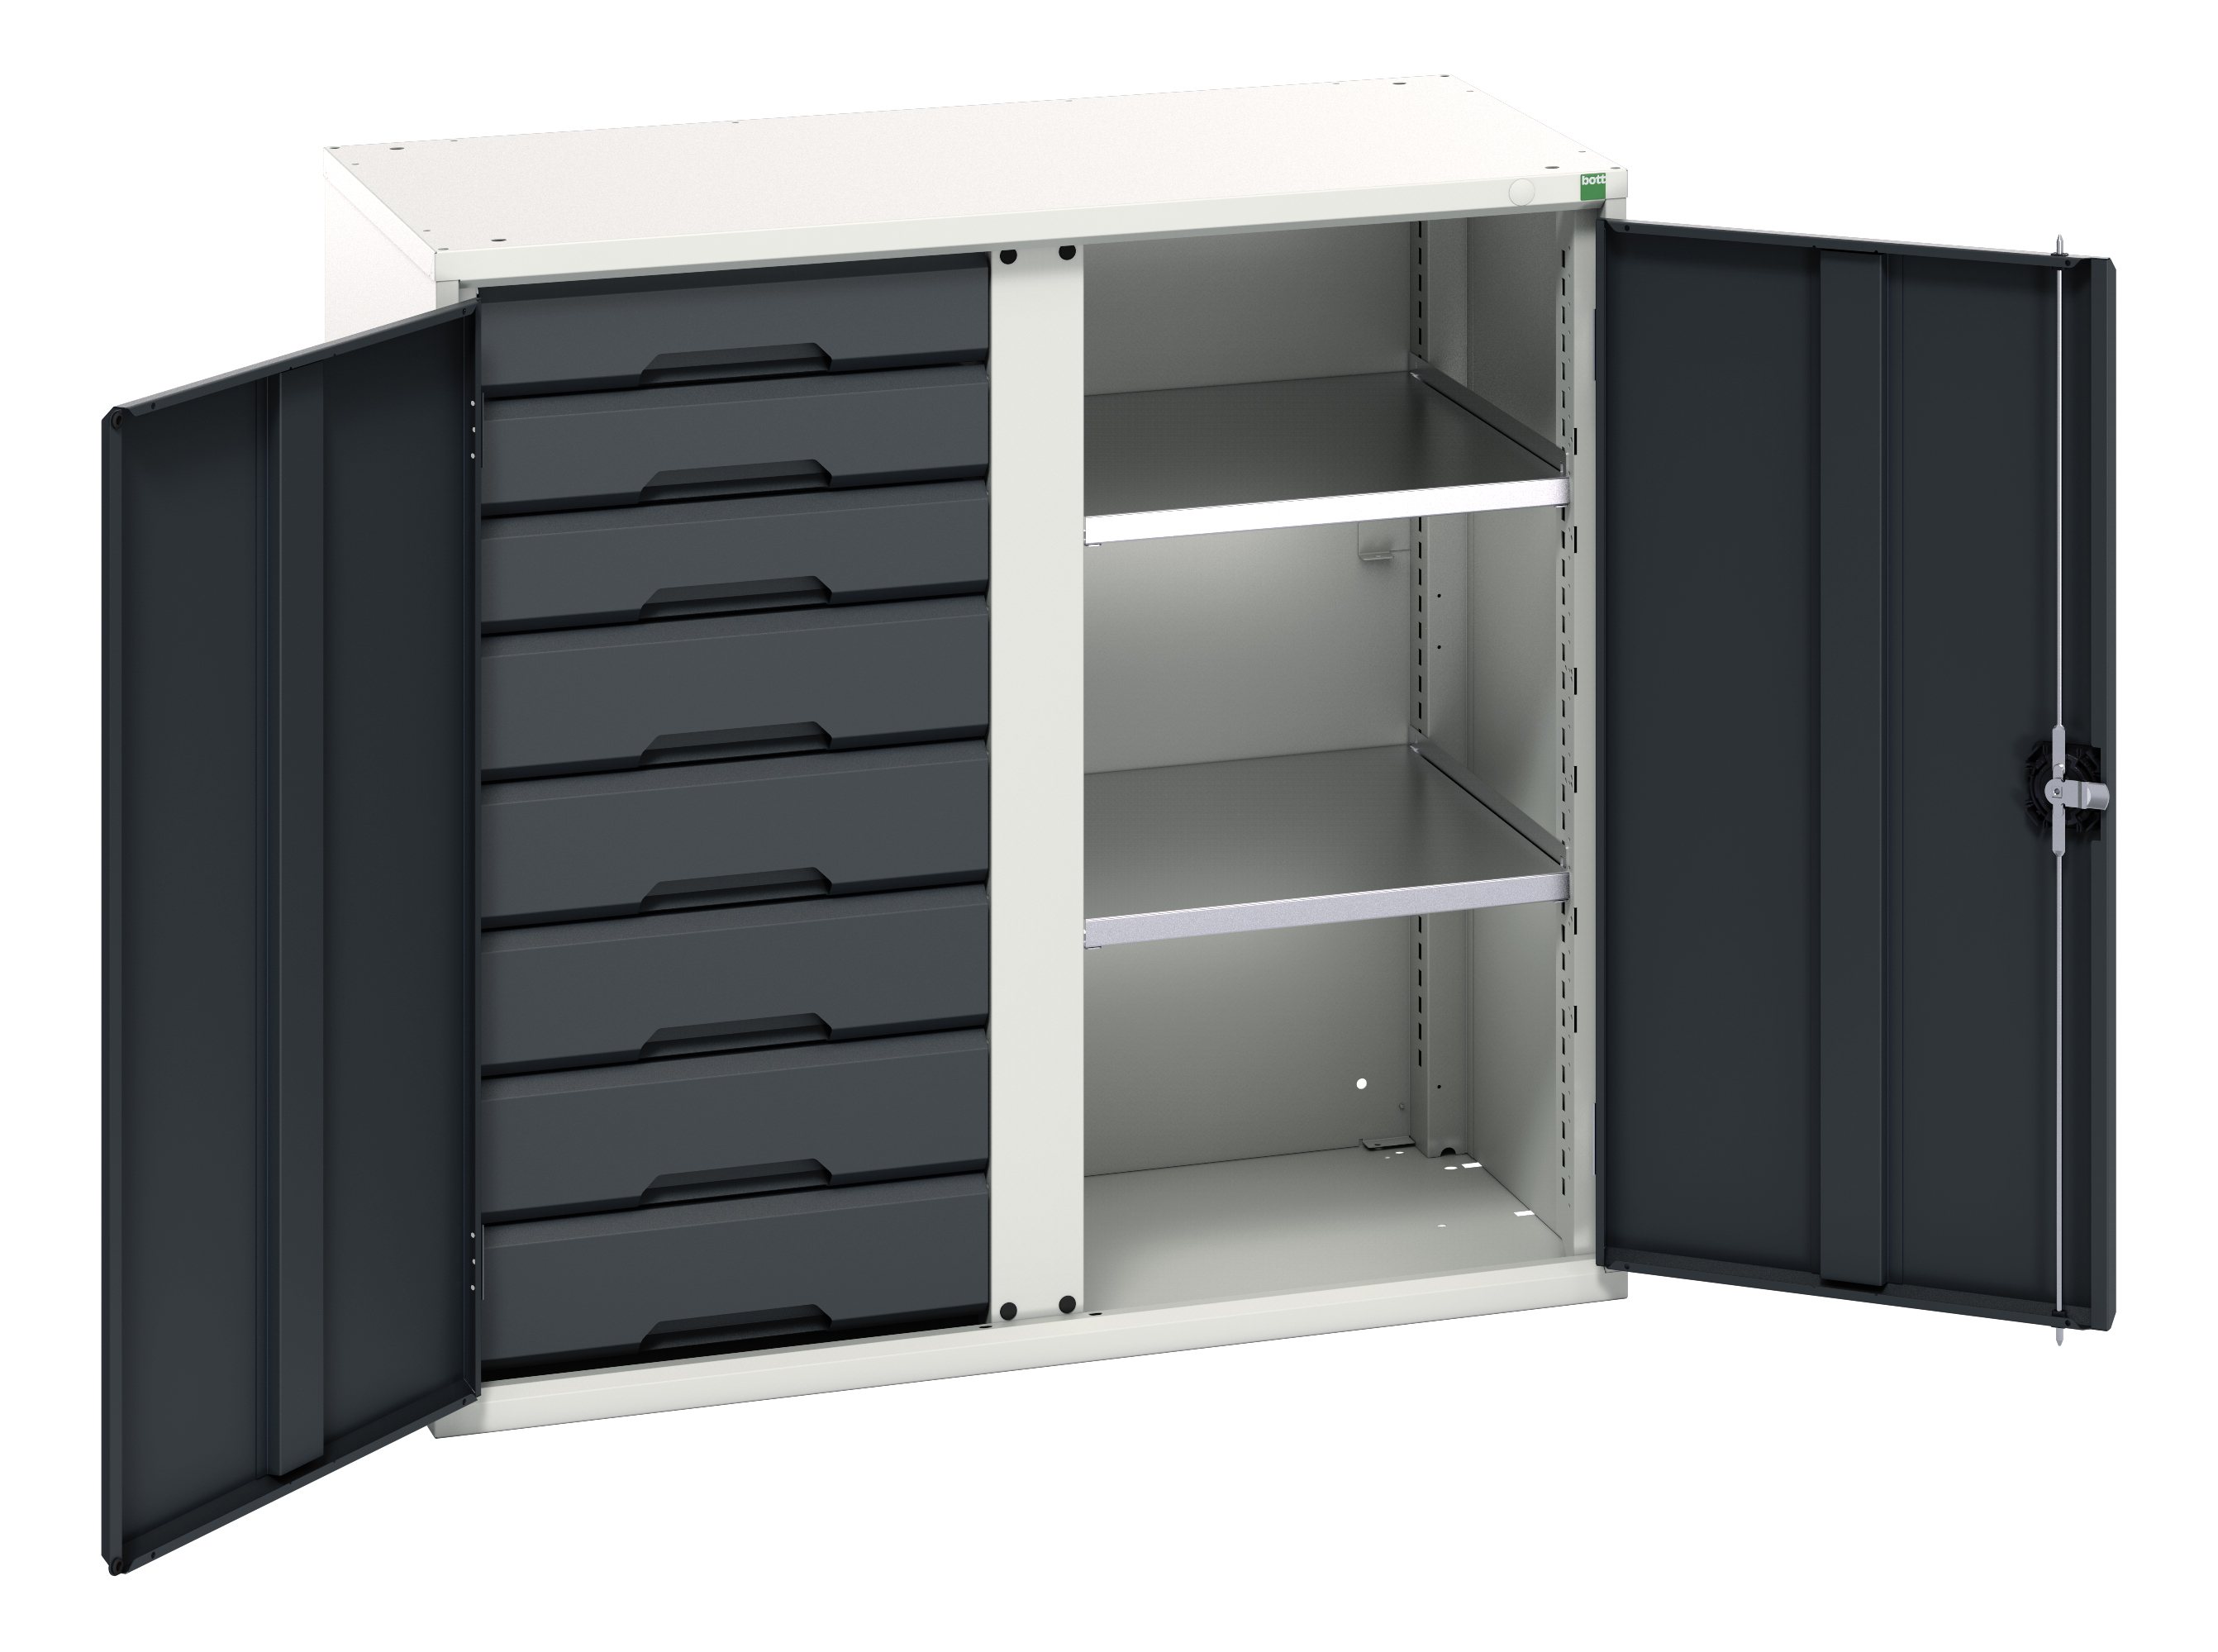 Bott Verso Kitted Cupboard With Vertical Partition - 16926558.19